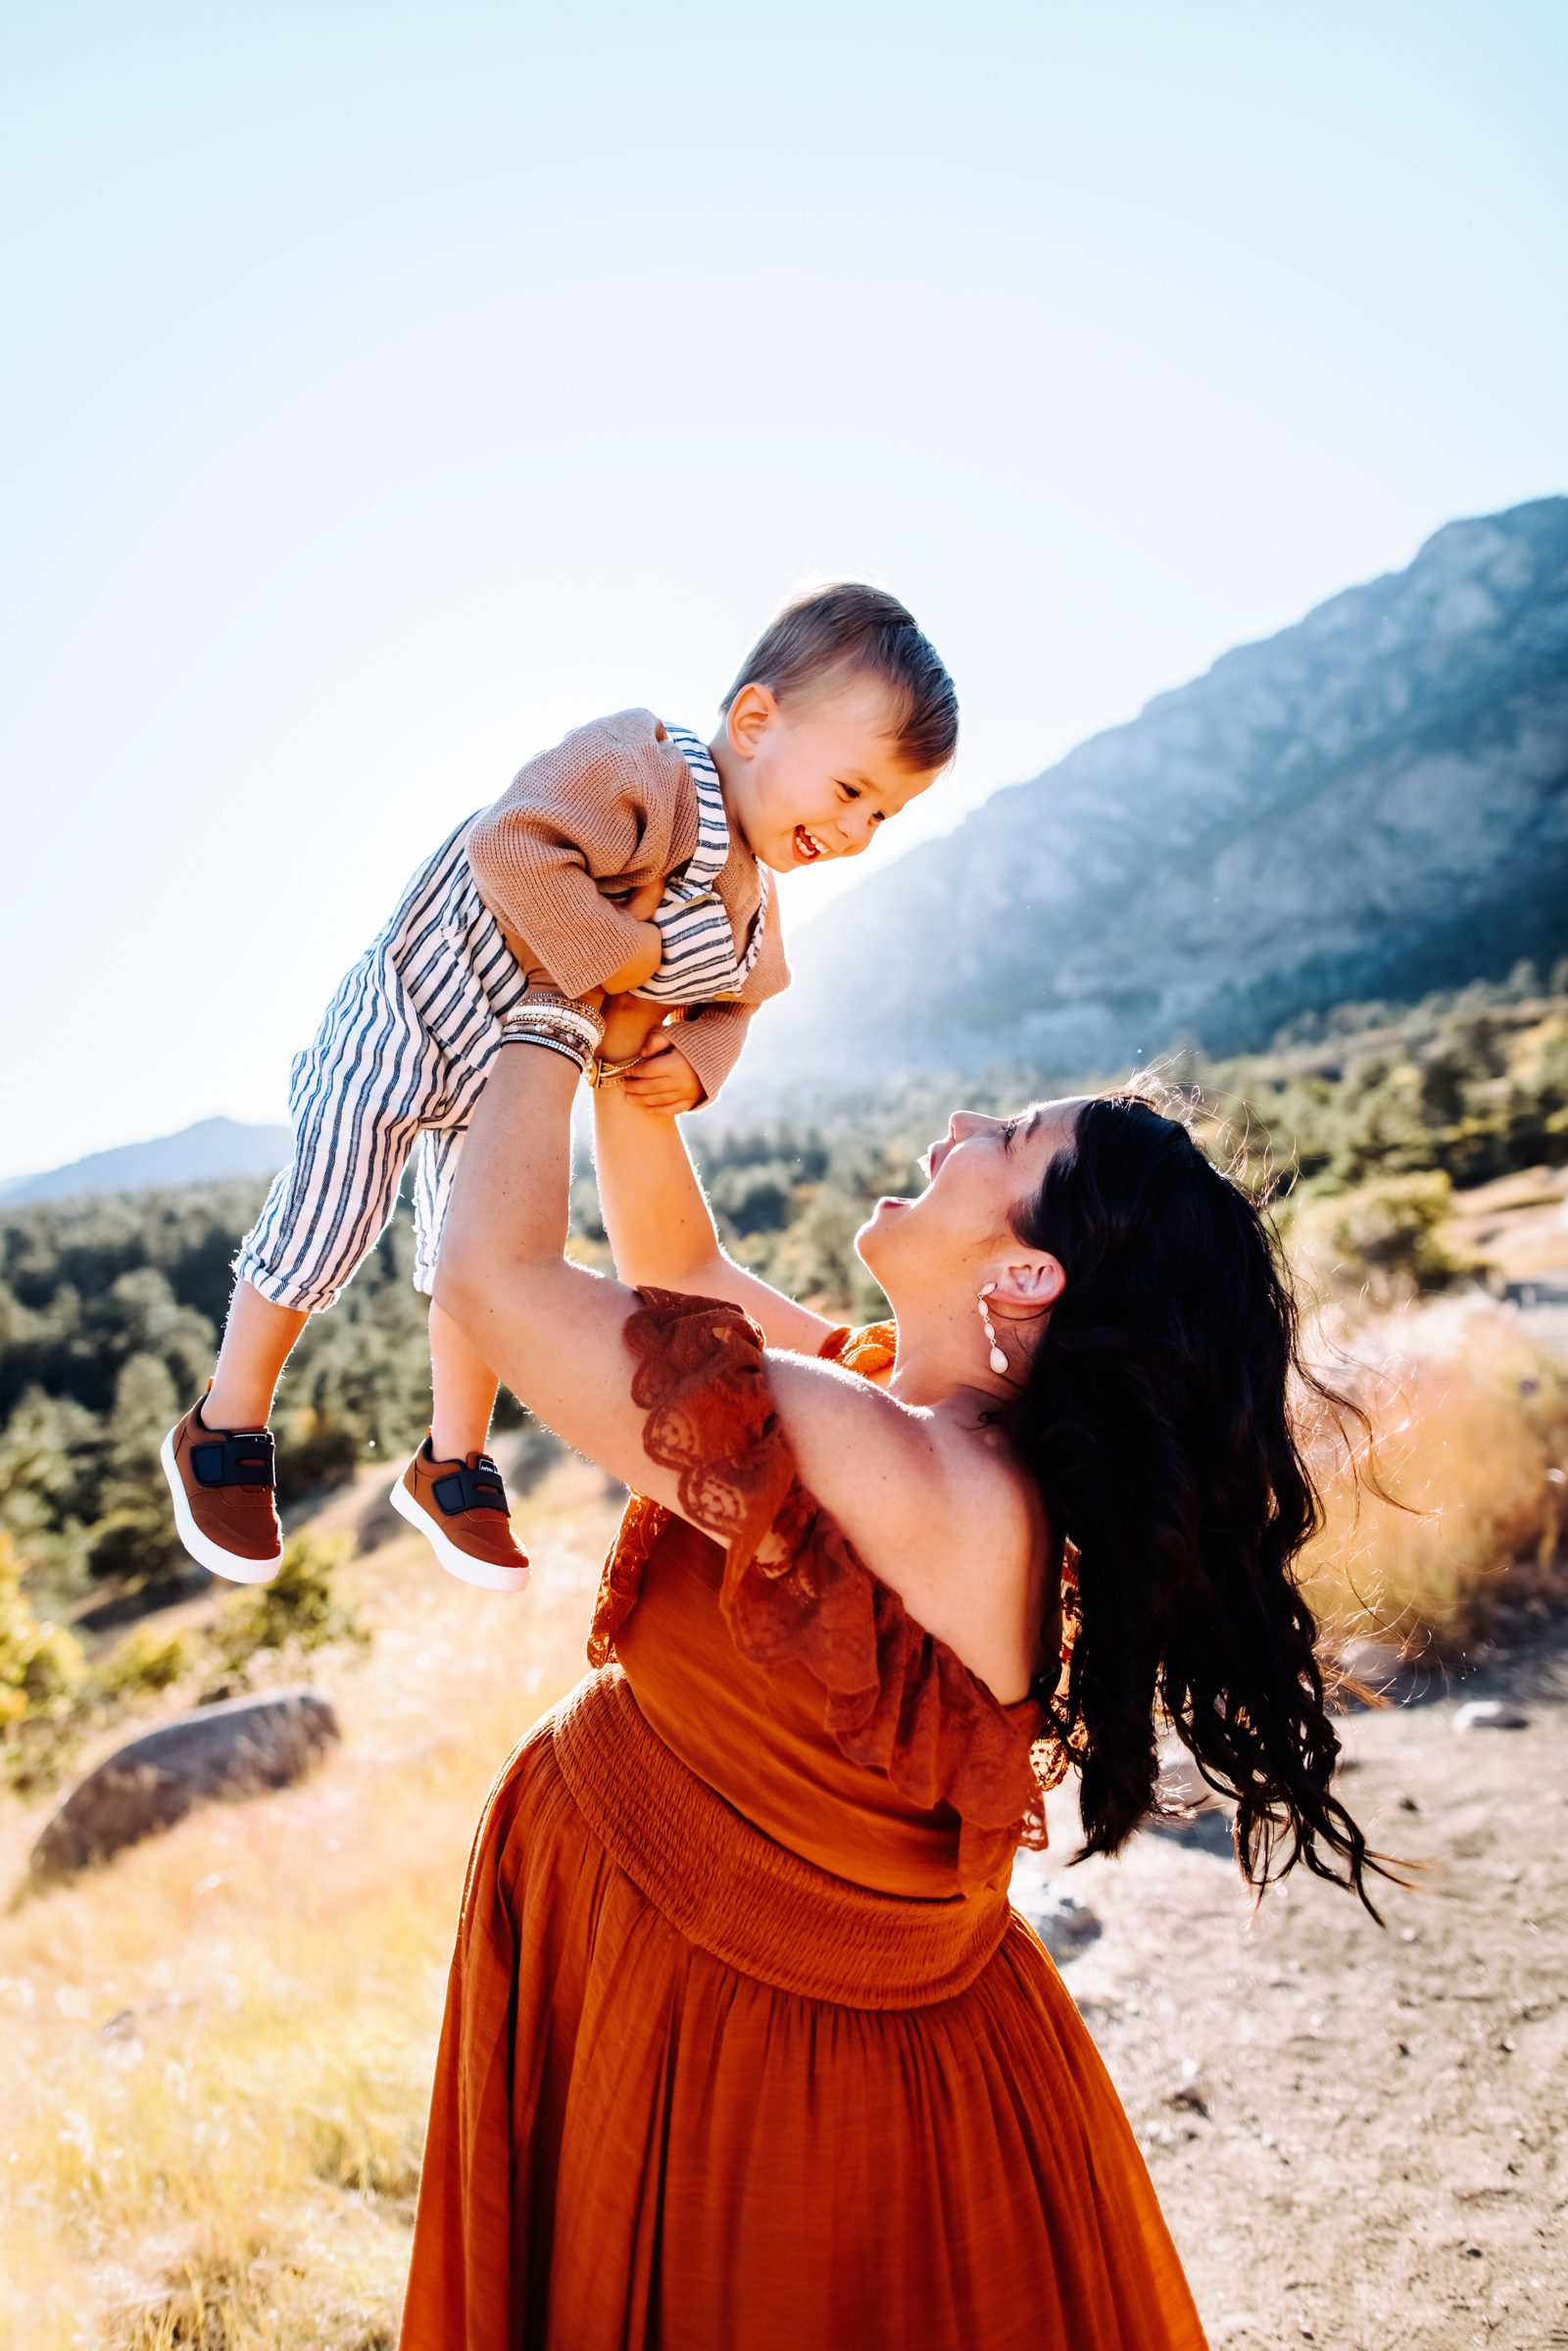 My favorite prompts for mom and baby photos